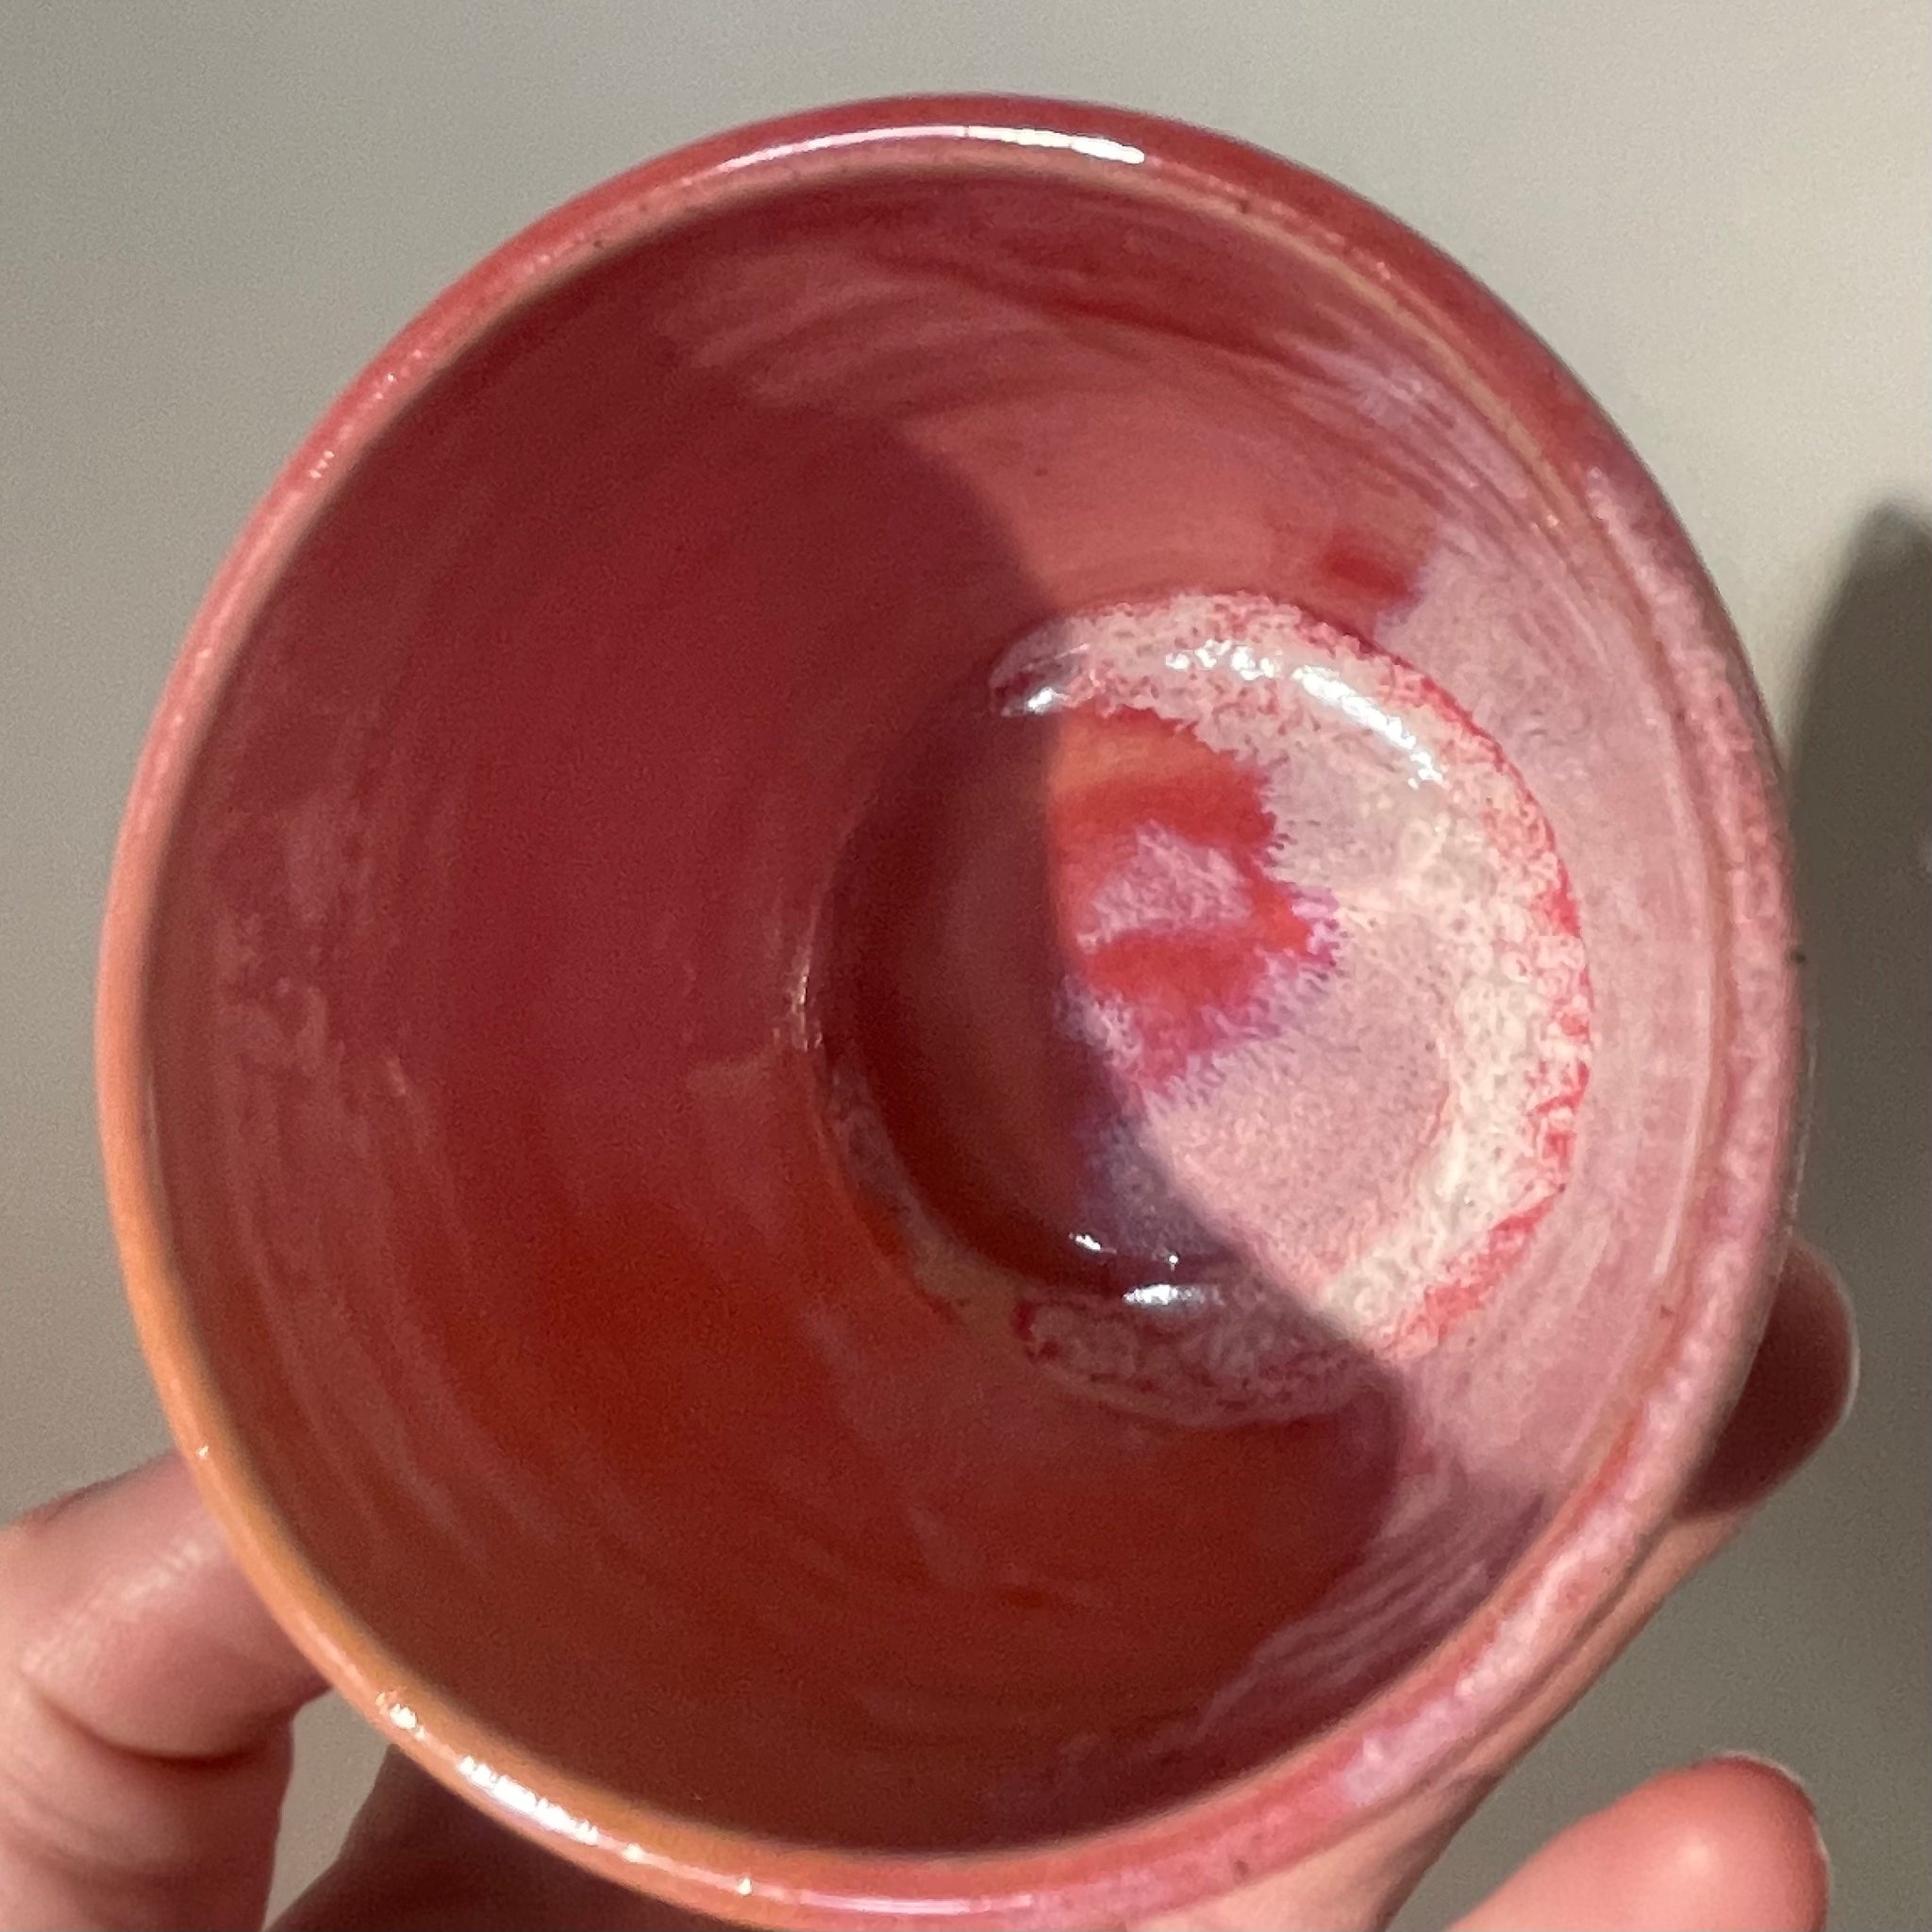 Small Pink Sunrise Cup